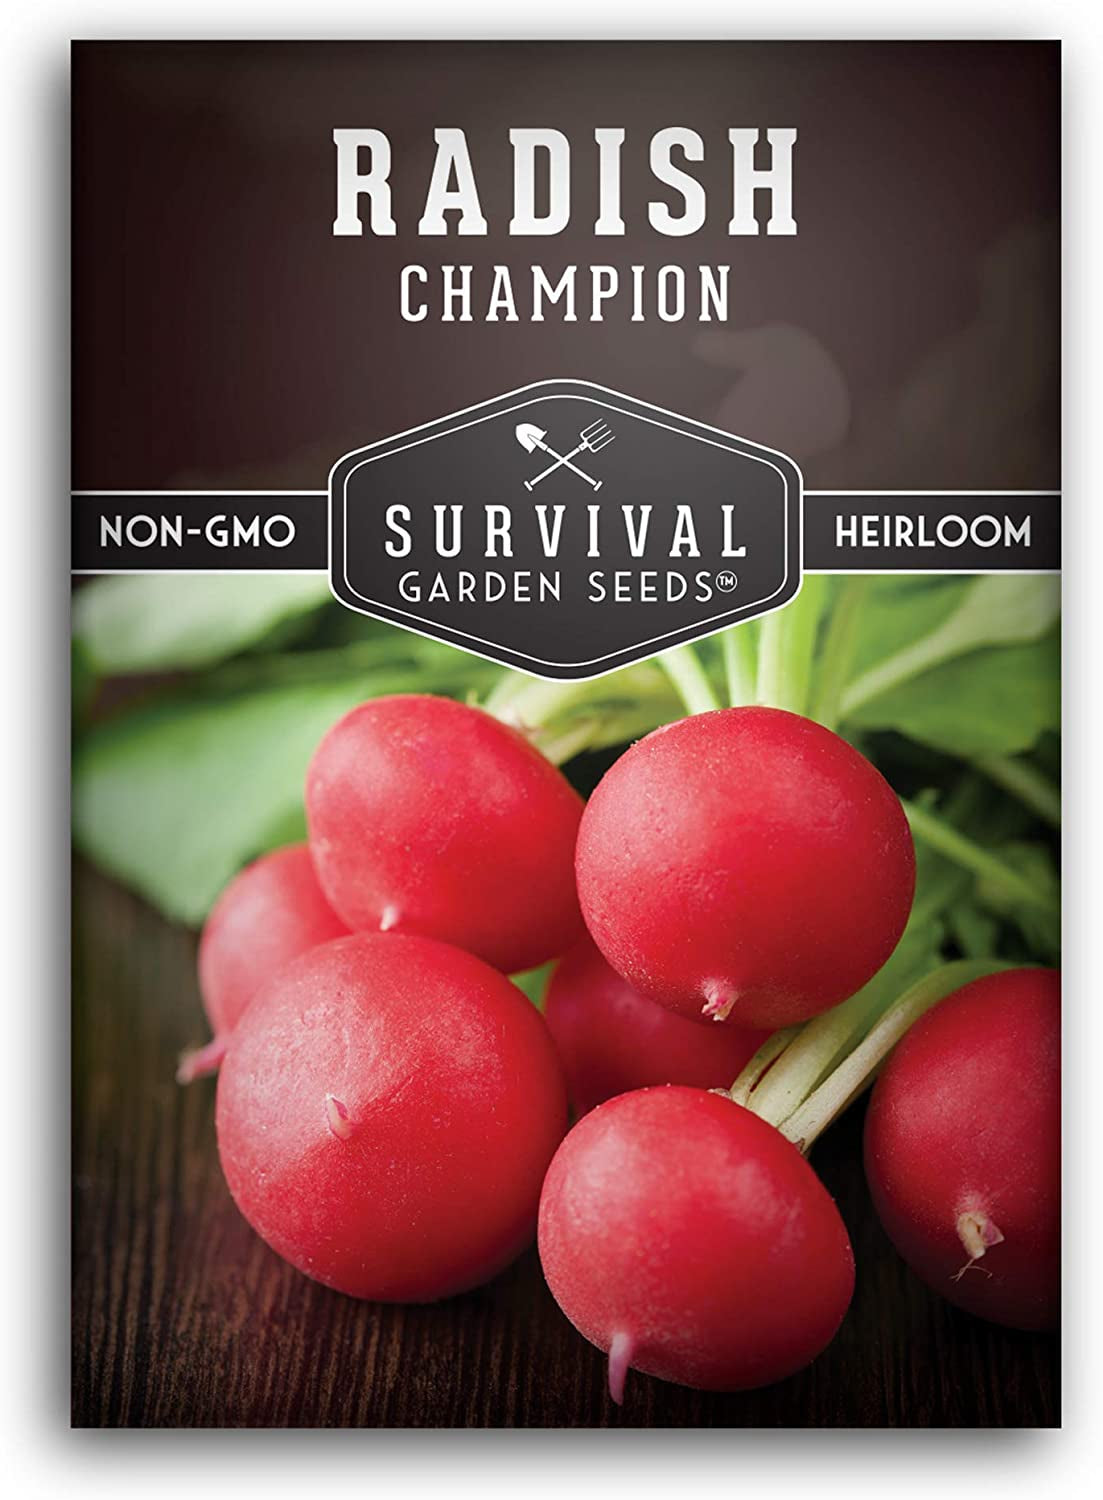 - Champion Radish Seed for Planting - Packet with Instructions to Plant and Grow Red Radishes in Your Home Vegetable Garden - Non-Gmo Heirloom Variety